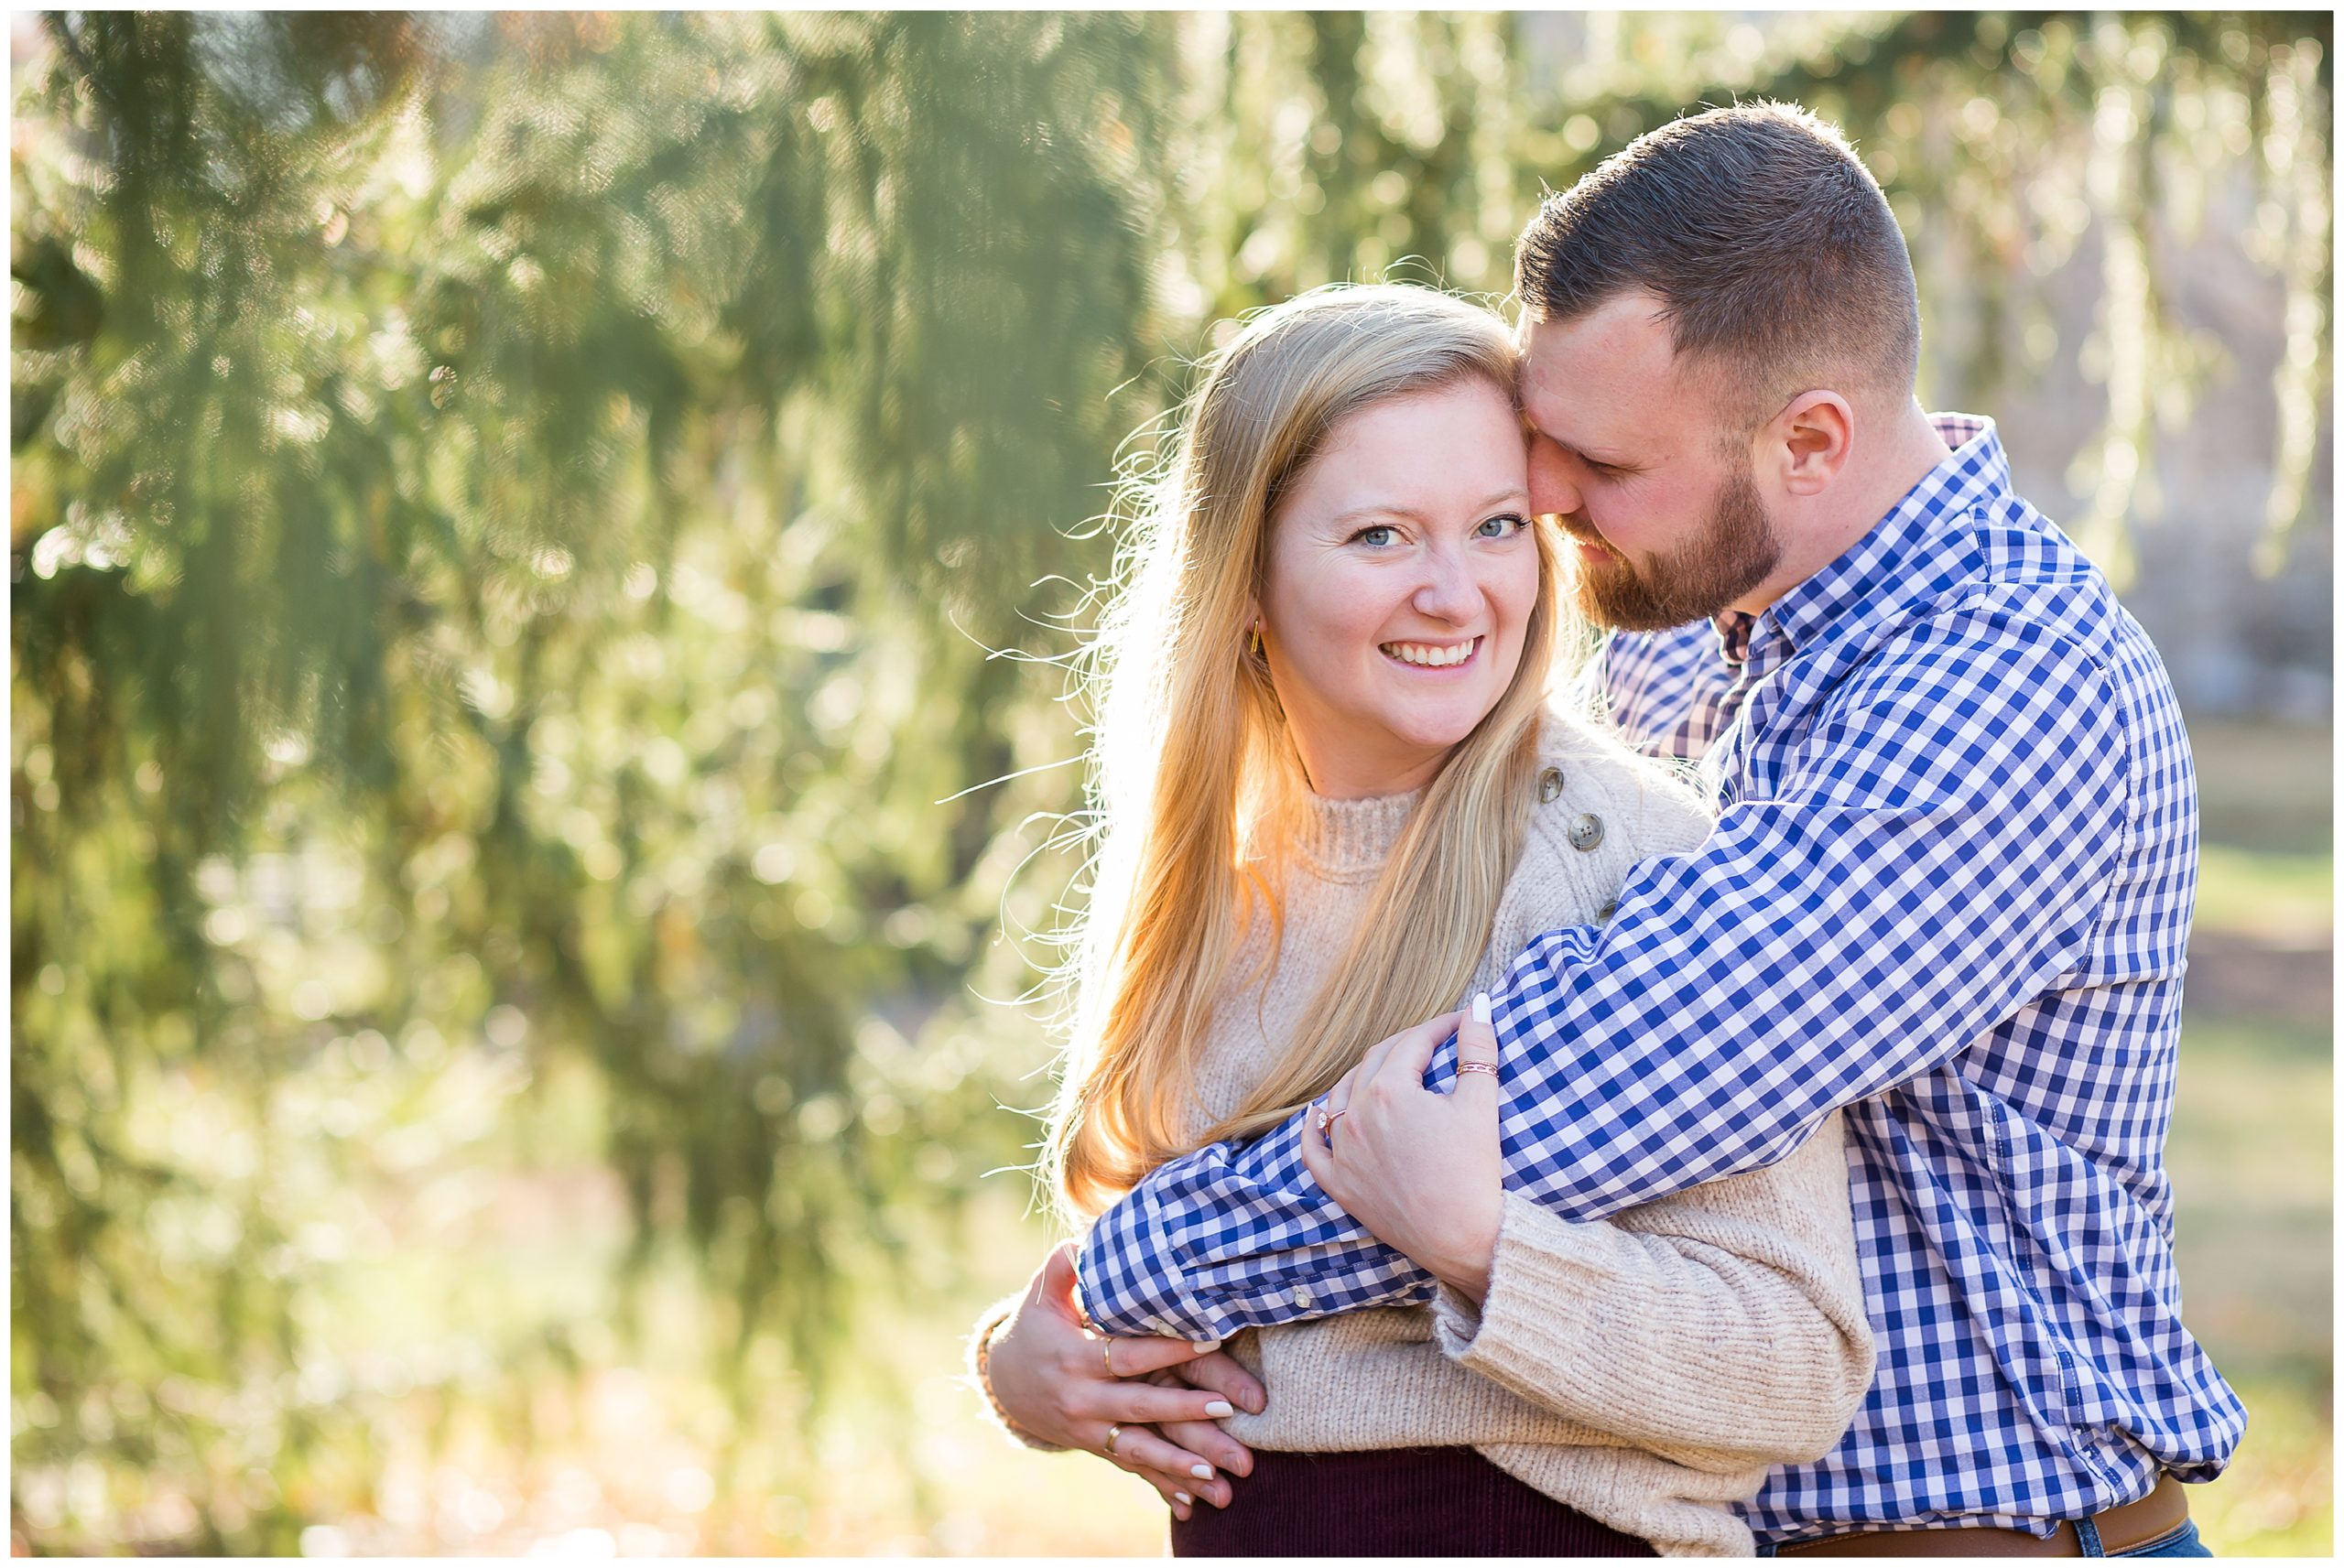 Engagement session at Mizzou in Columbia MO by Bella Faith Photography